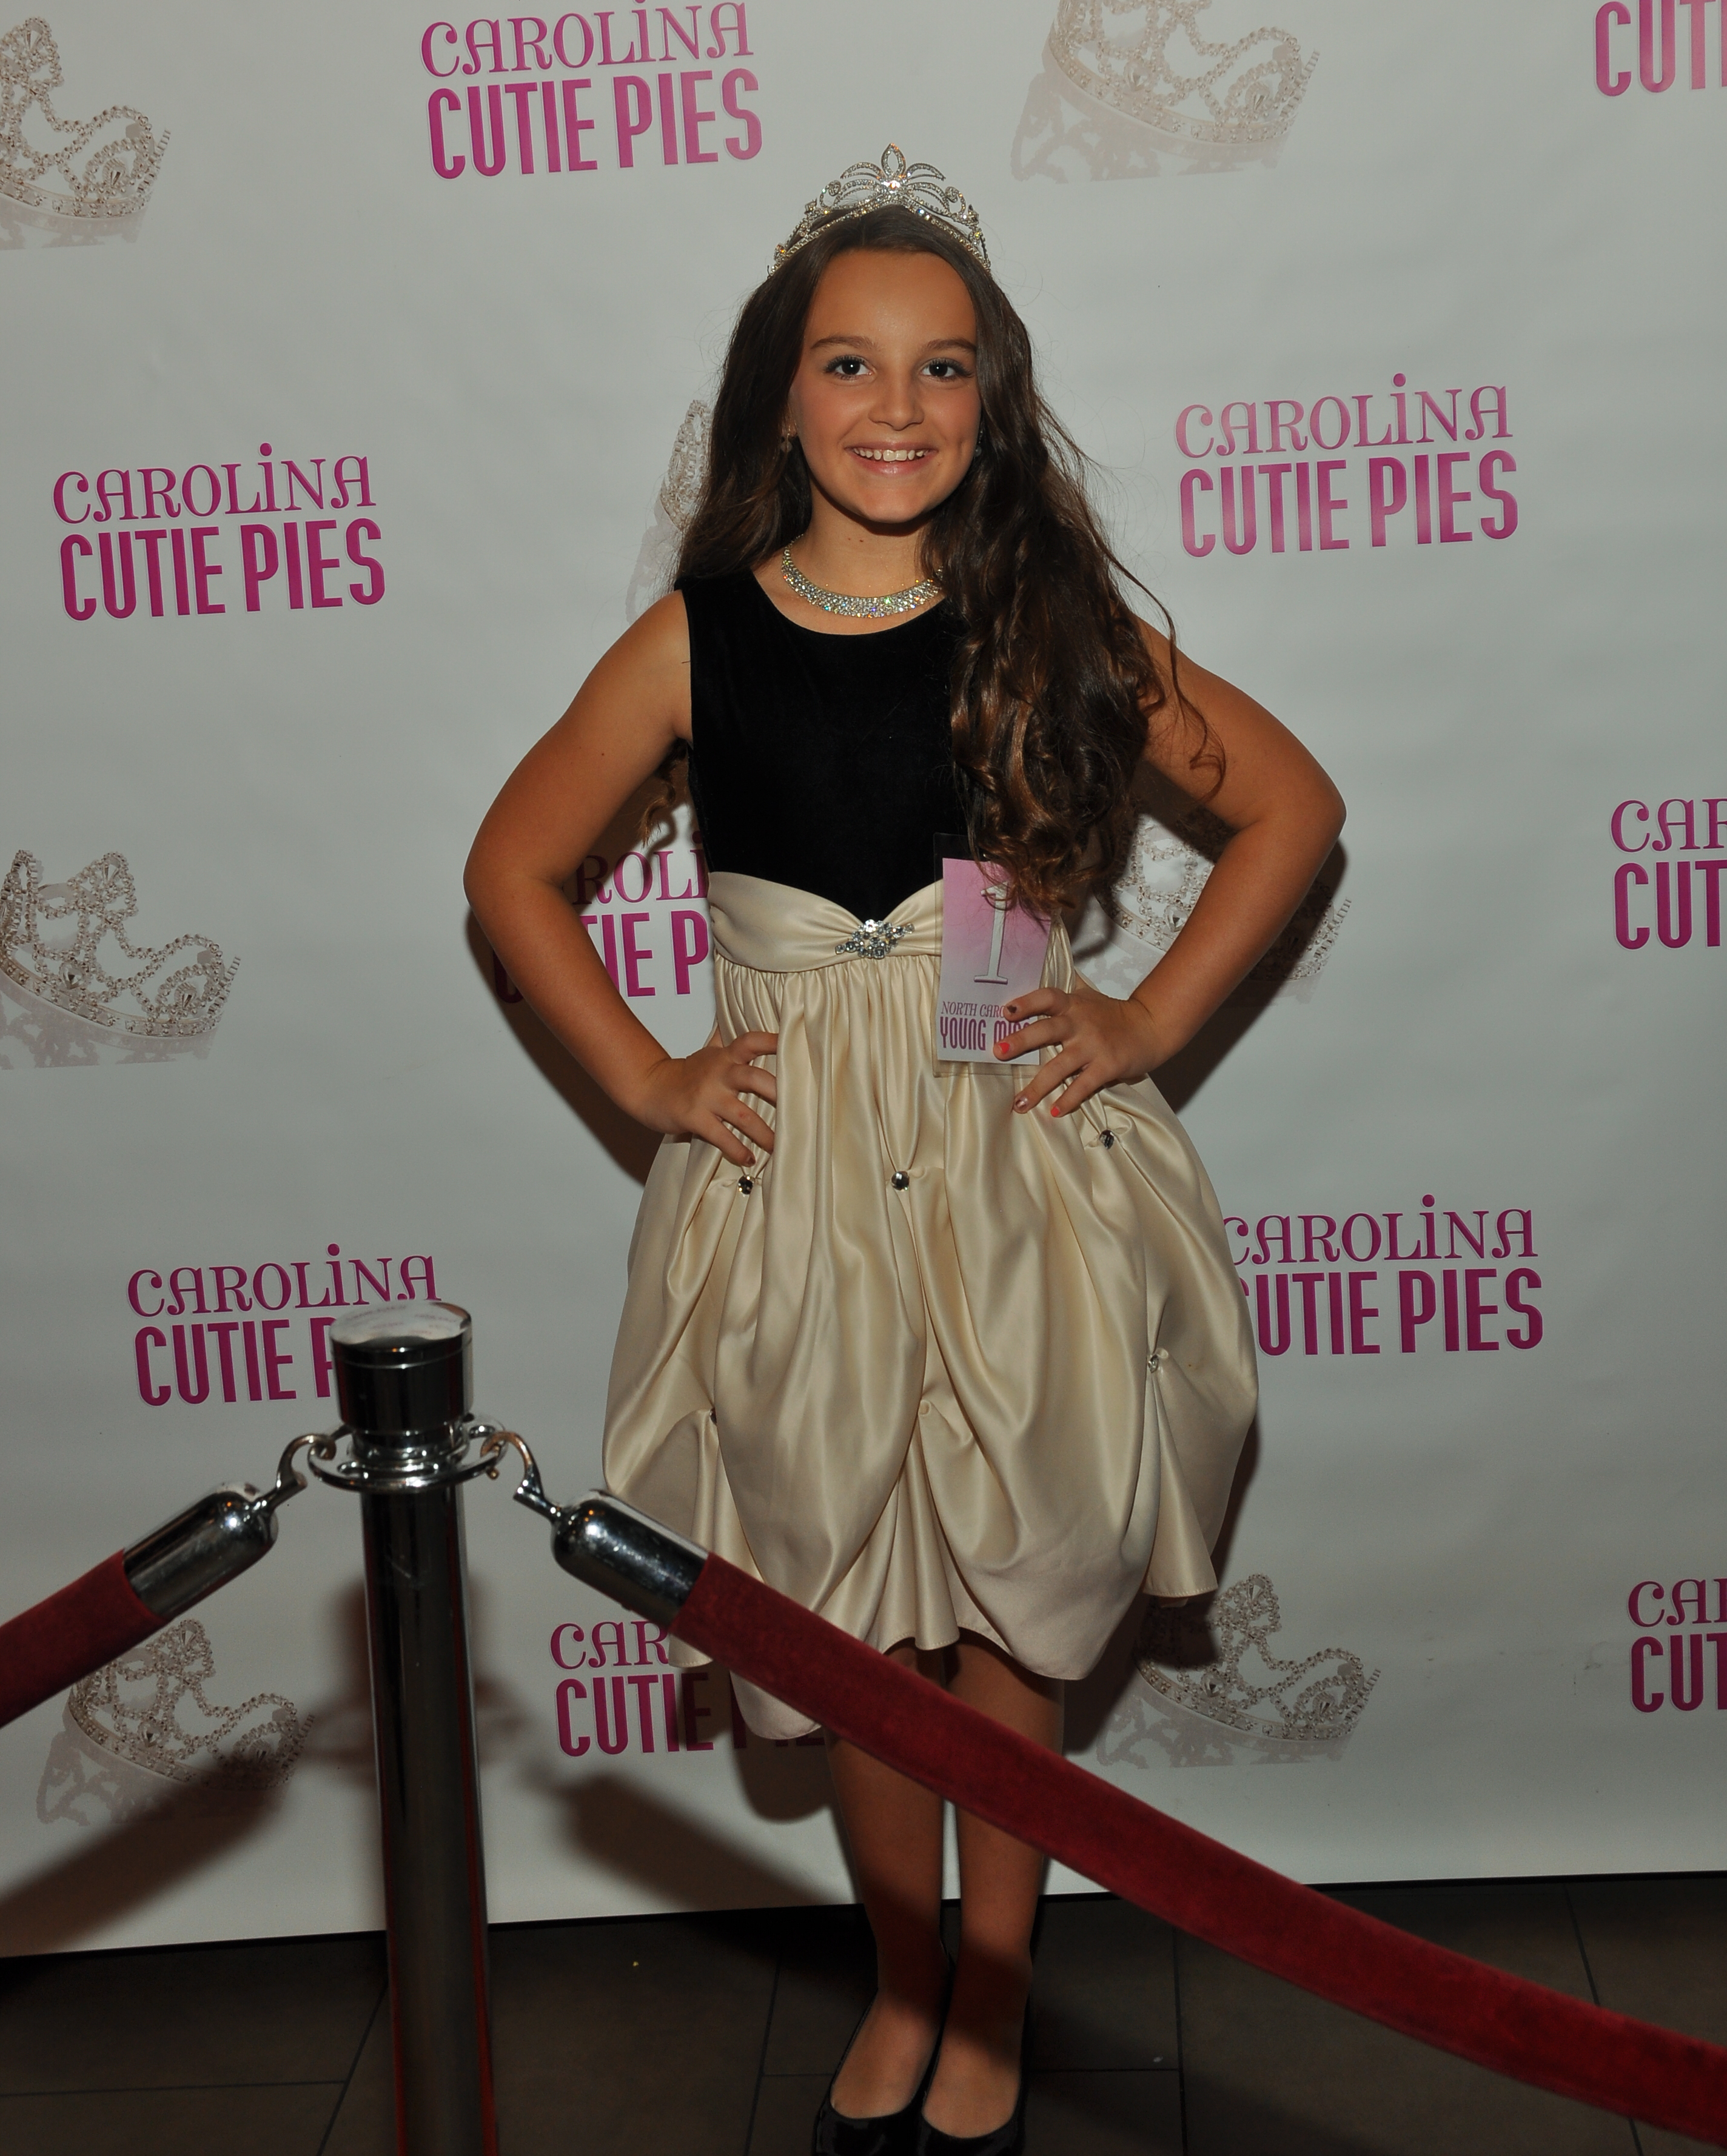 Blythe at the Red Carpet Premier for Jackass Presents: Bad Grandpa